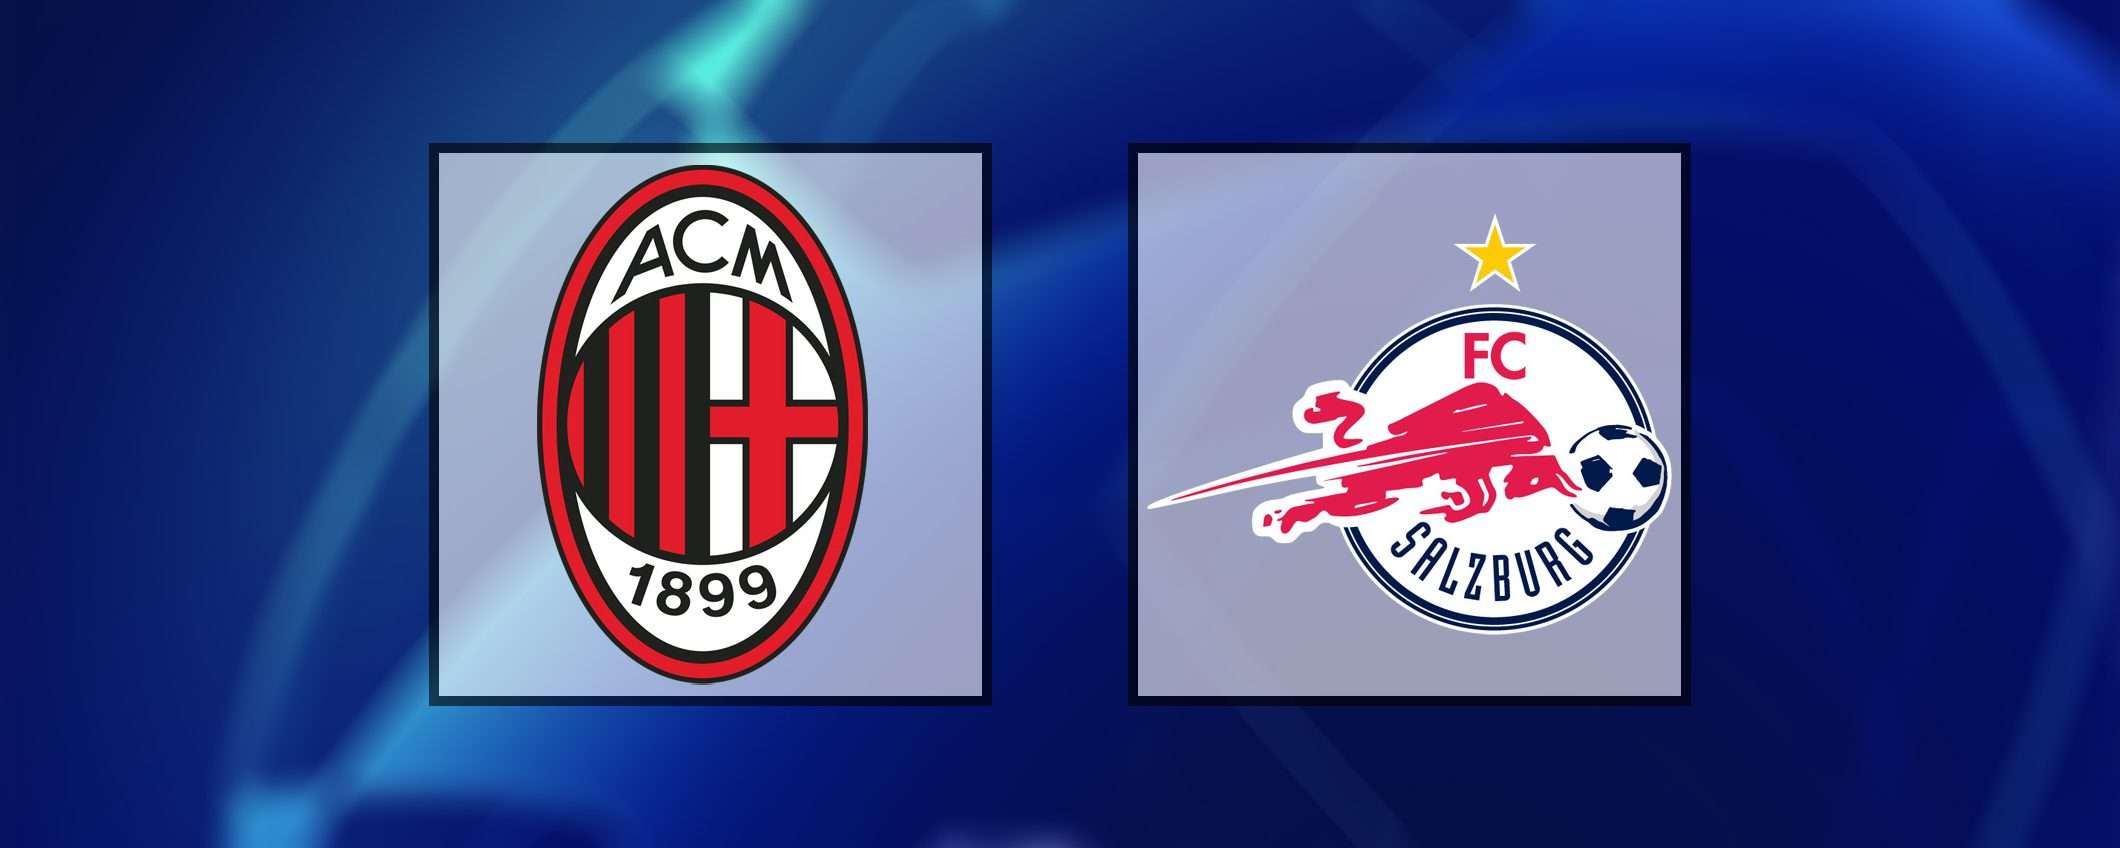 Come vedere Milan-Salisburgo in streaming (Champions)